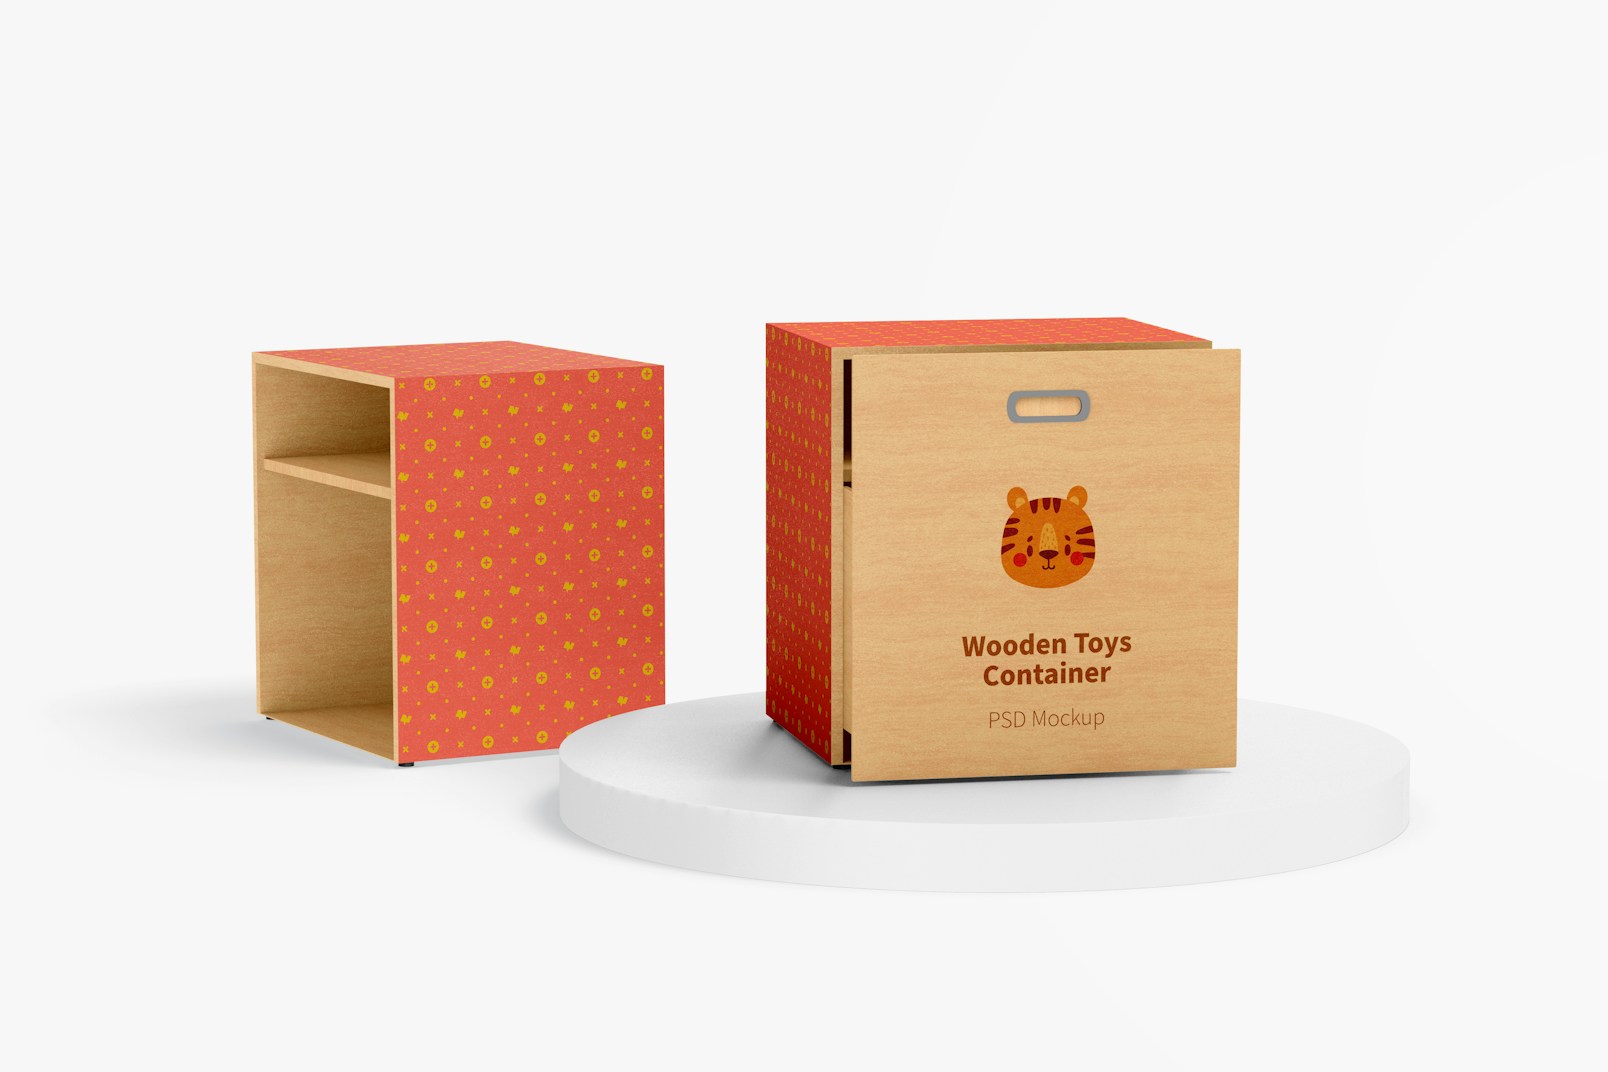 Wooden Toys Containers with Wheels Mockup, Perspective